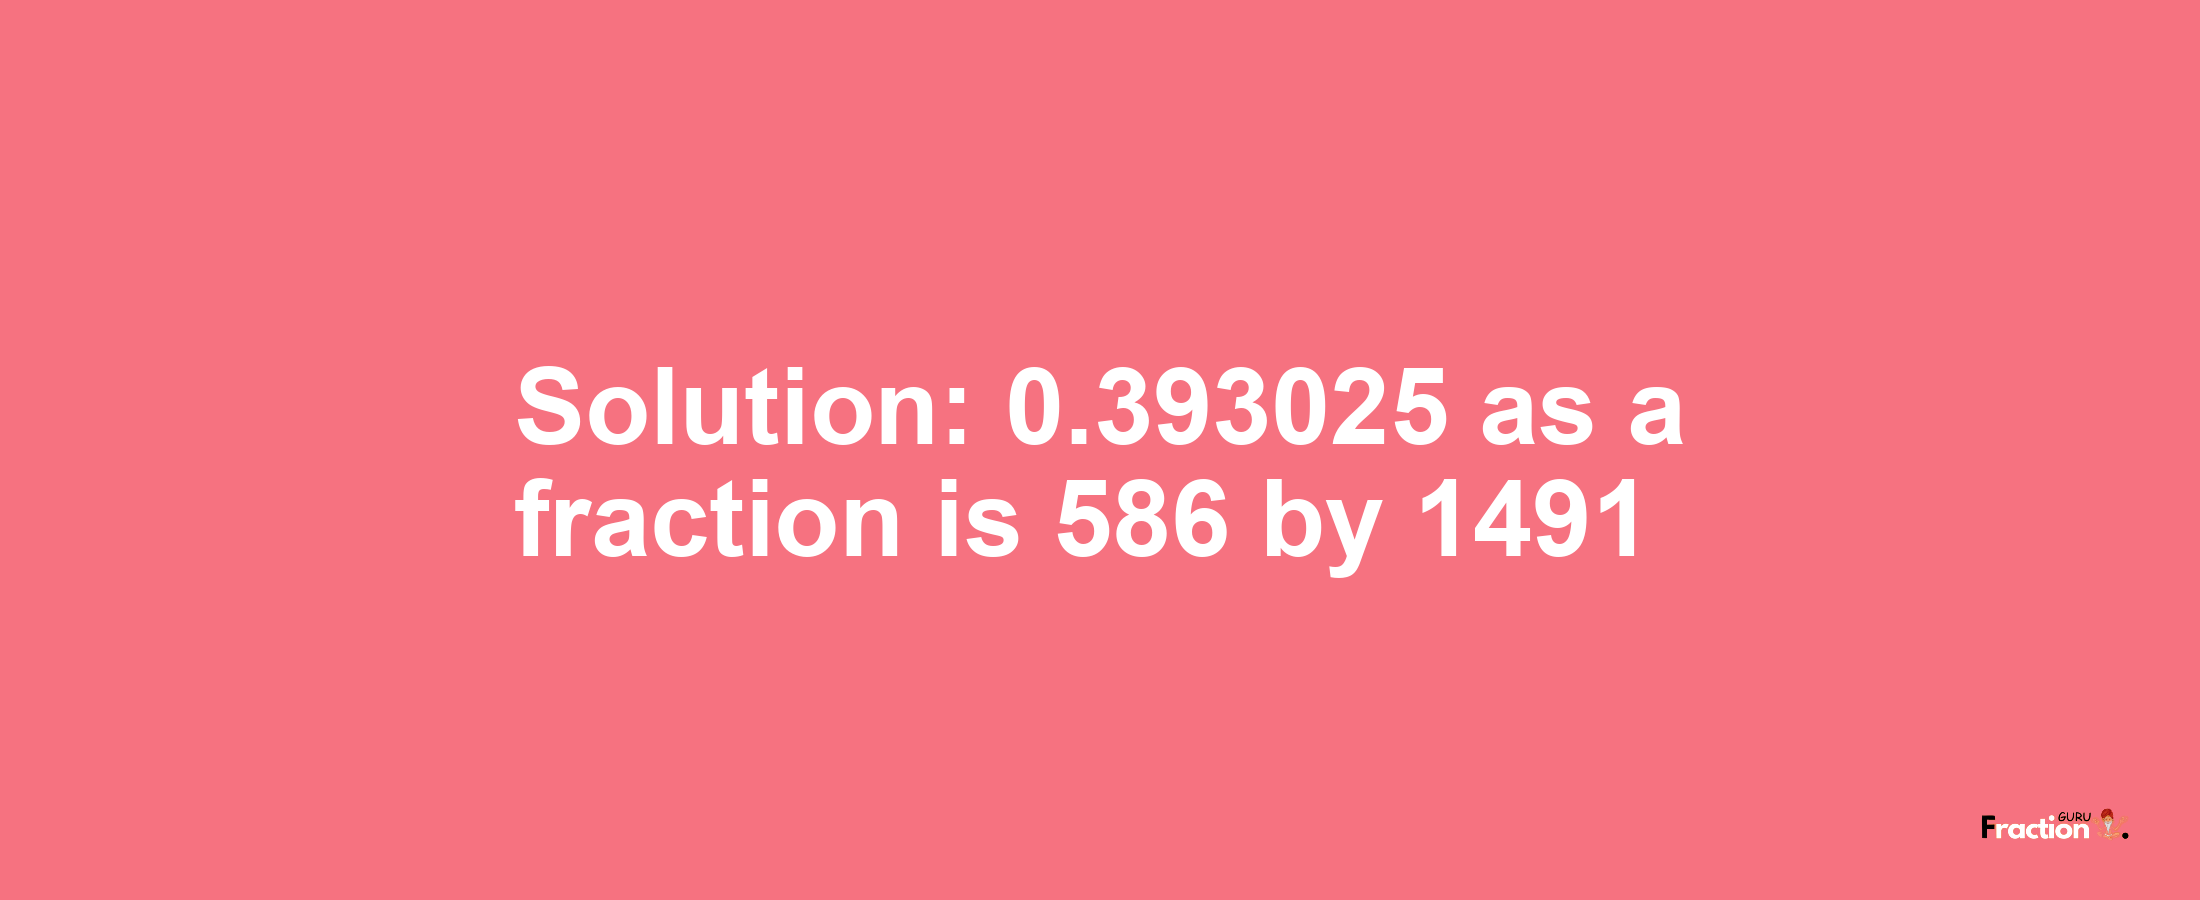 Solution:0.393025 as a fraction is 586/1491